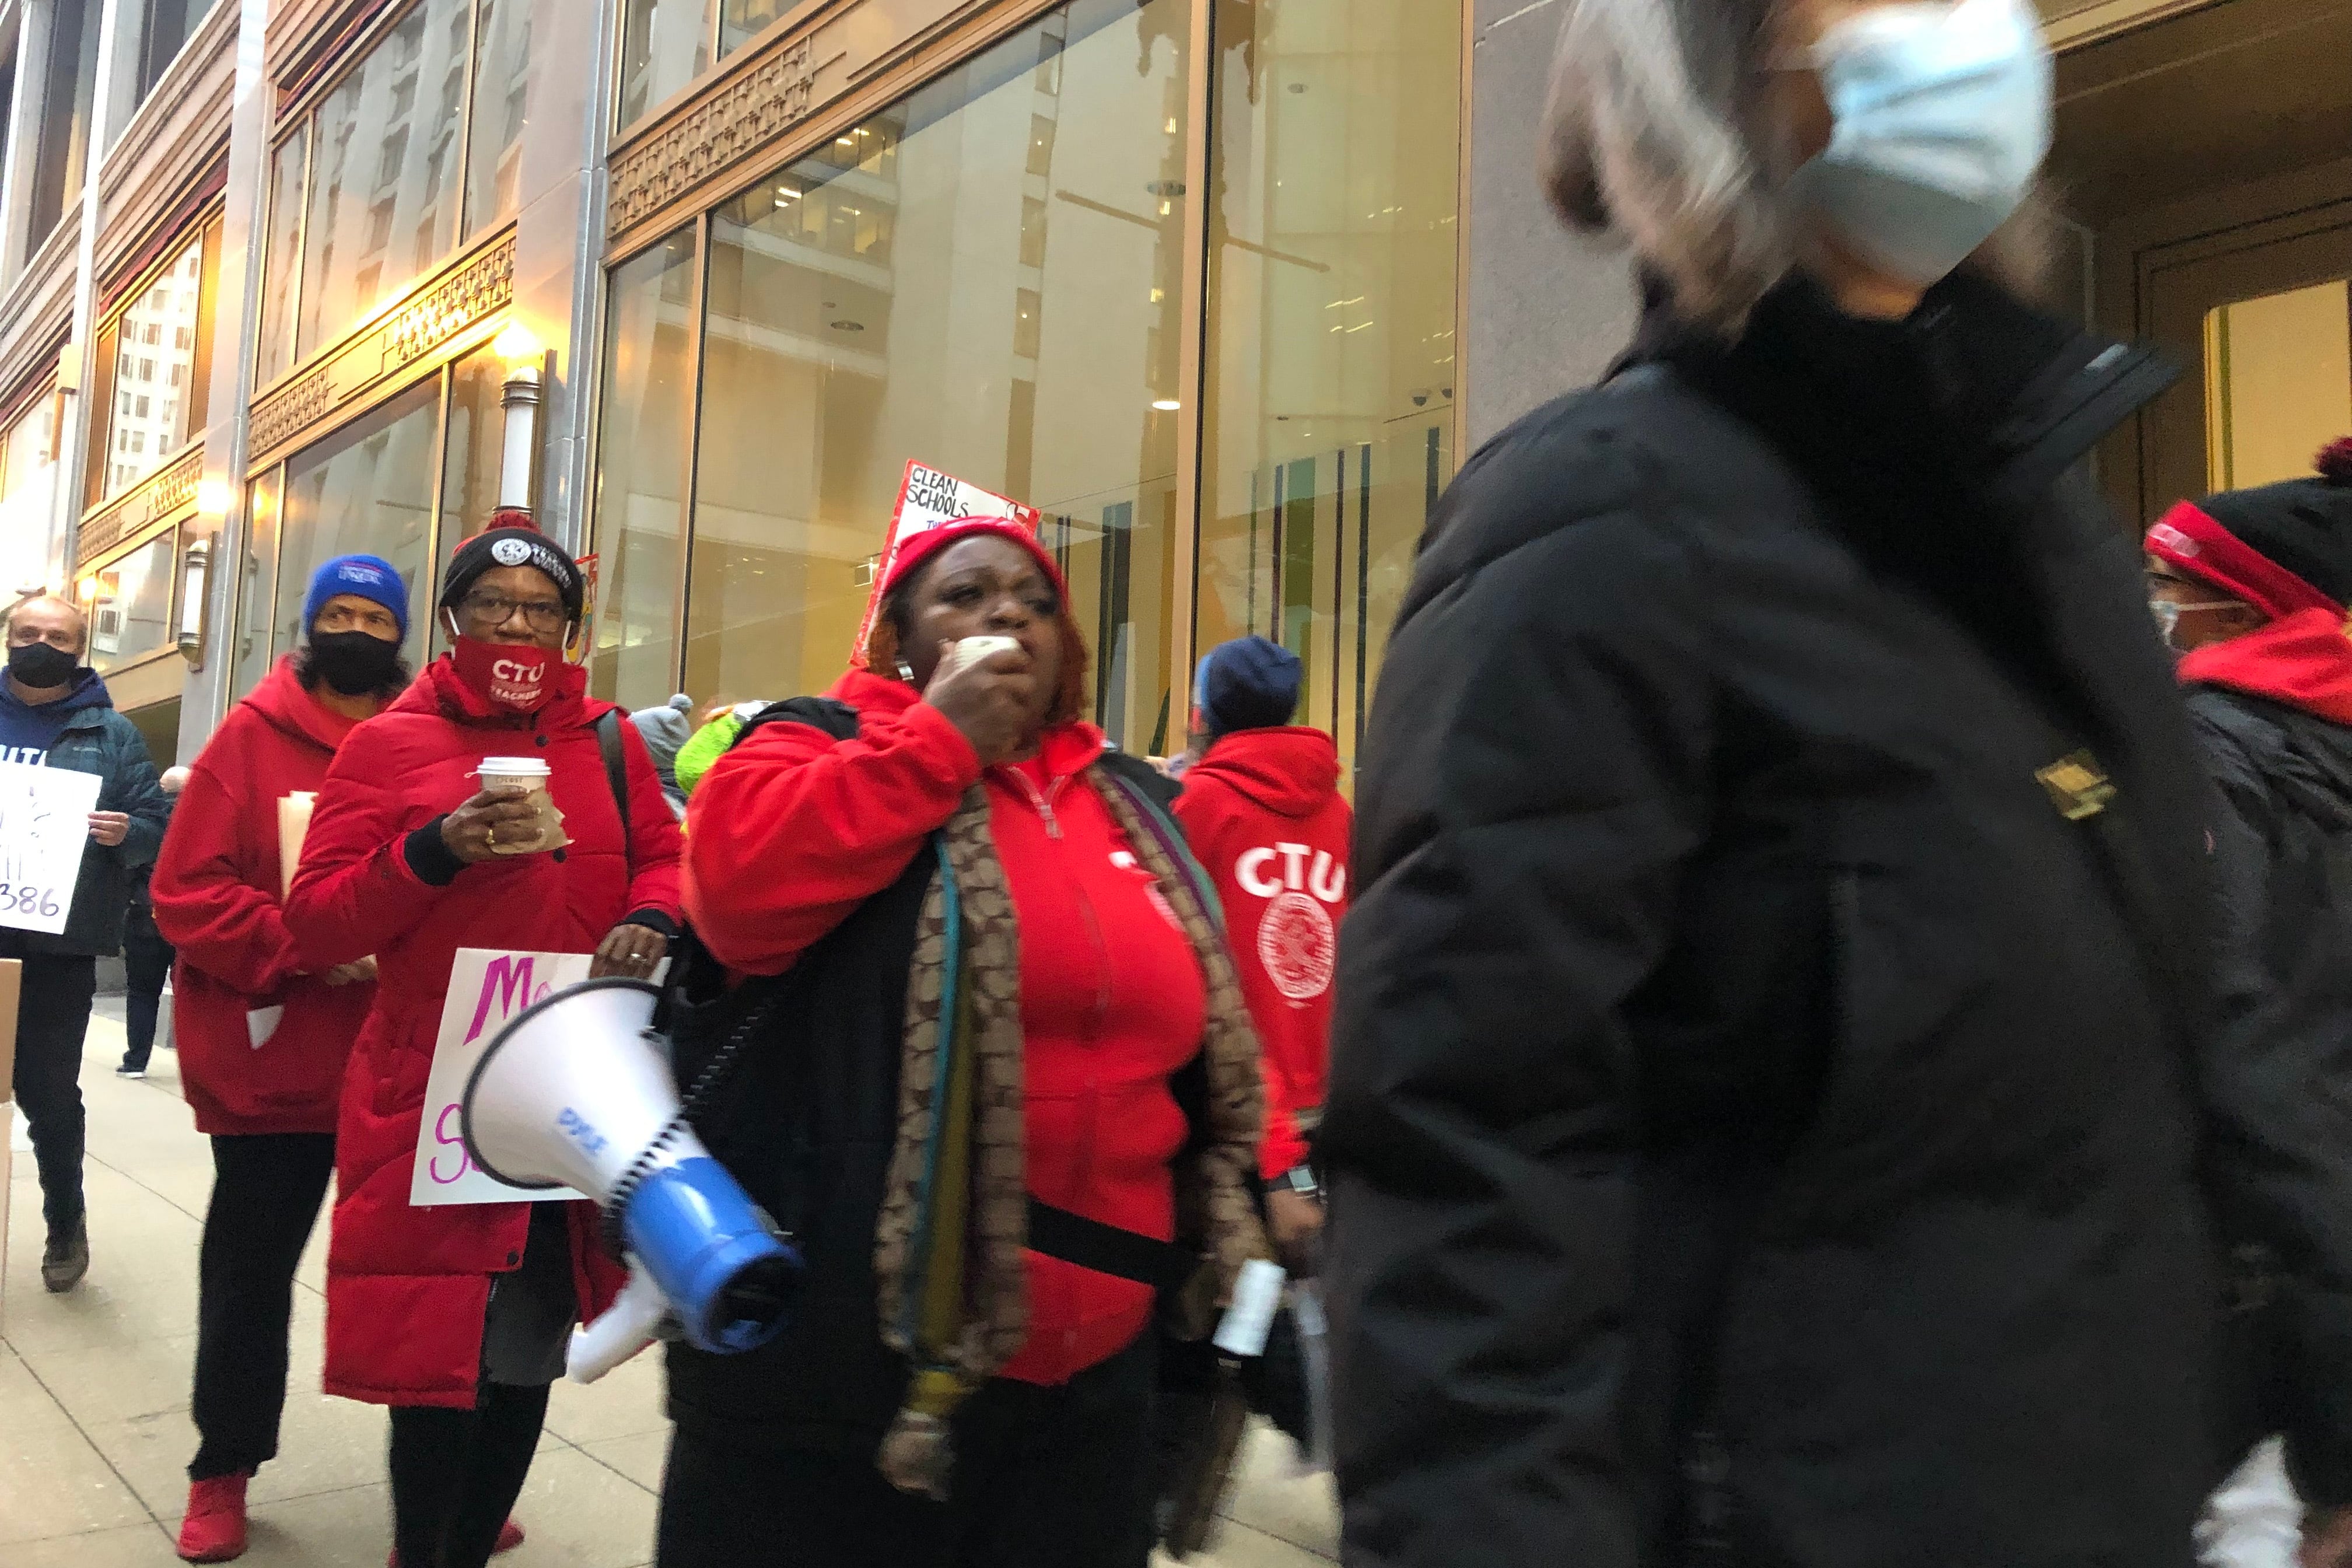 A group of people wearing red carrying posters and a megaphone march on a downtown sidewalk.